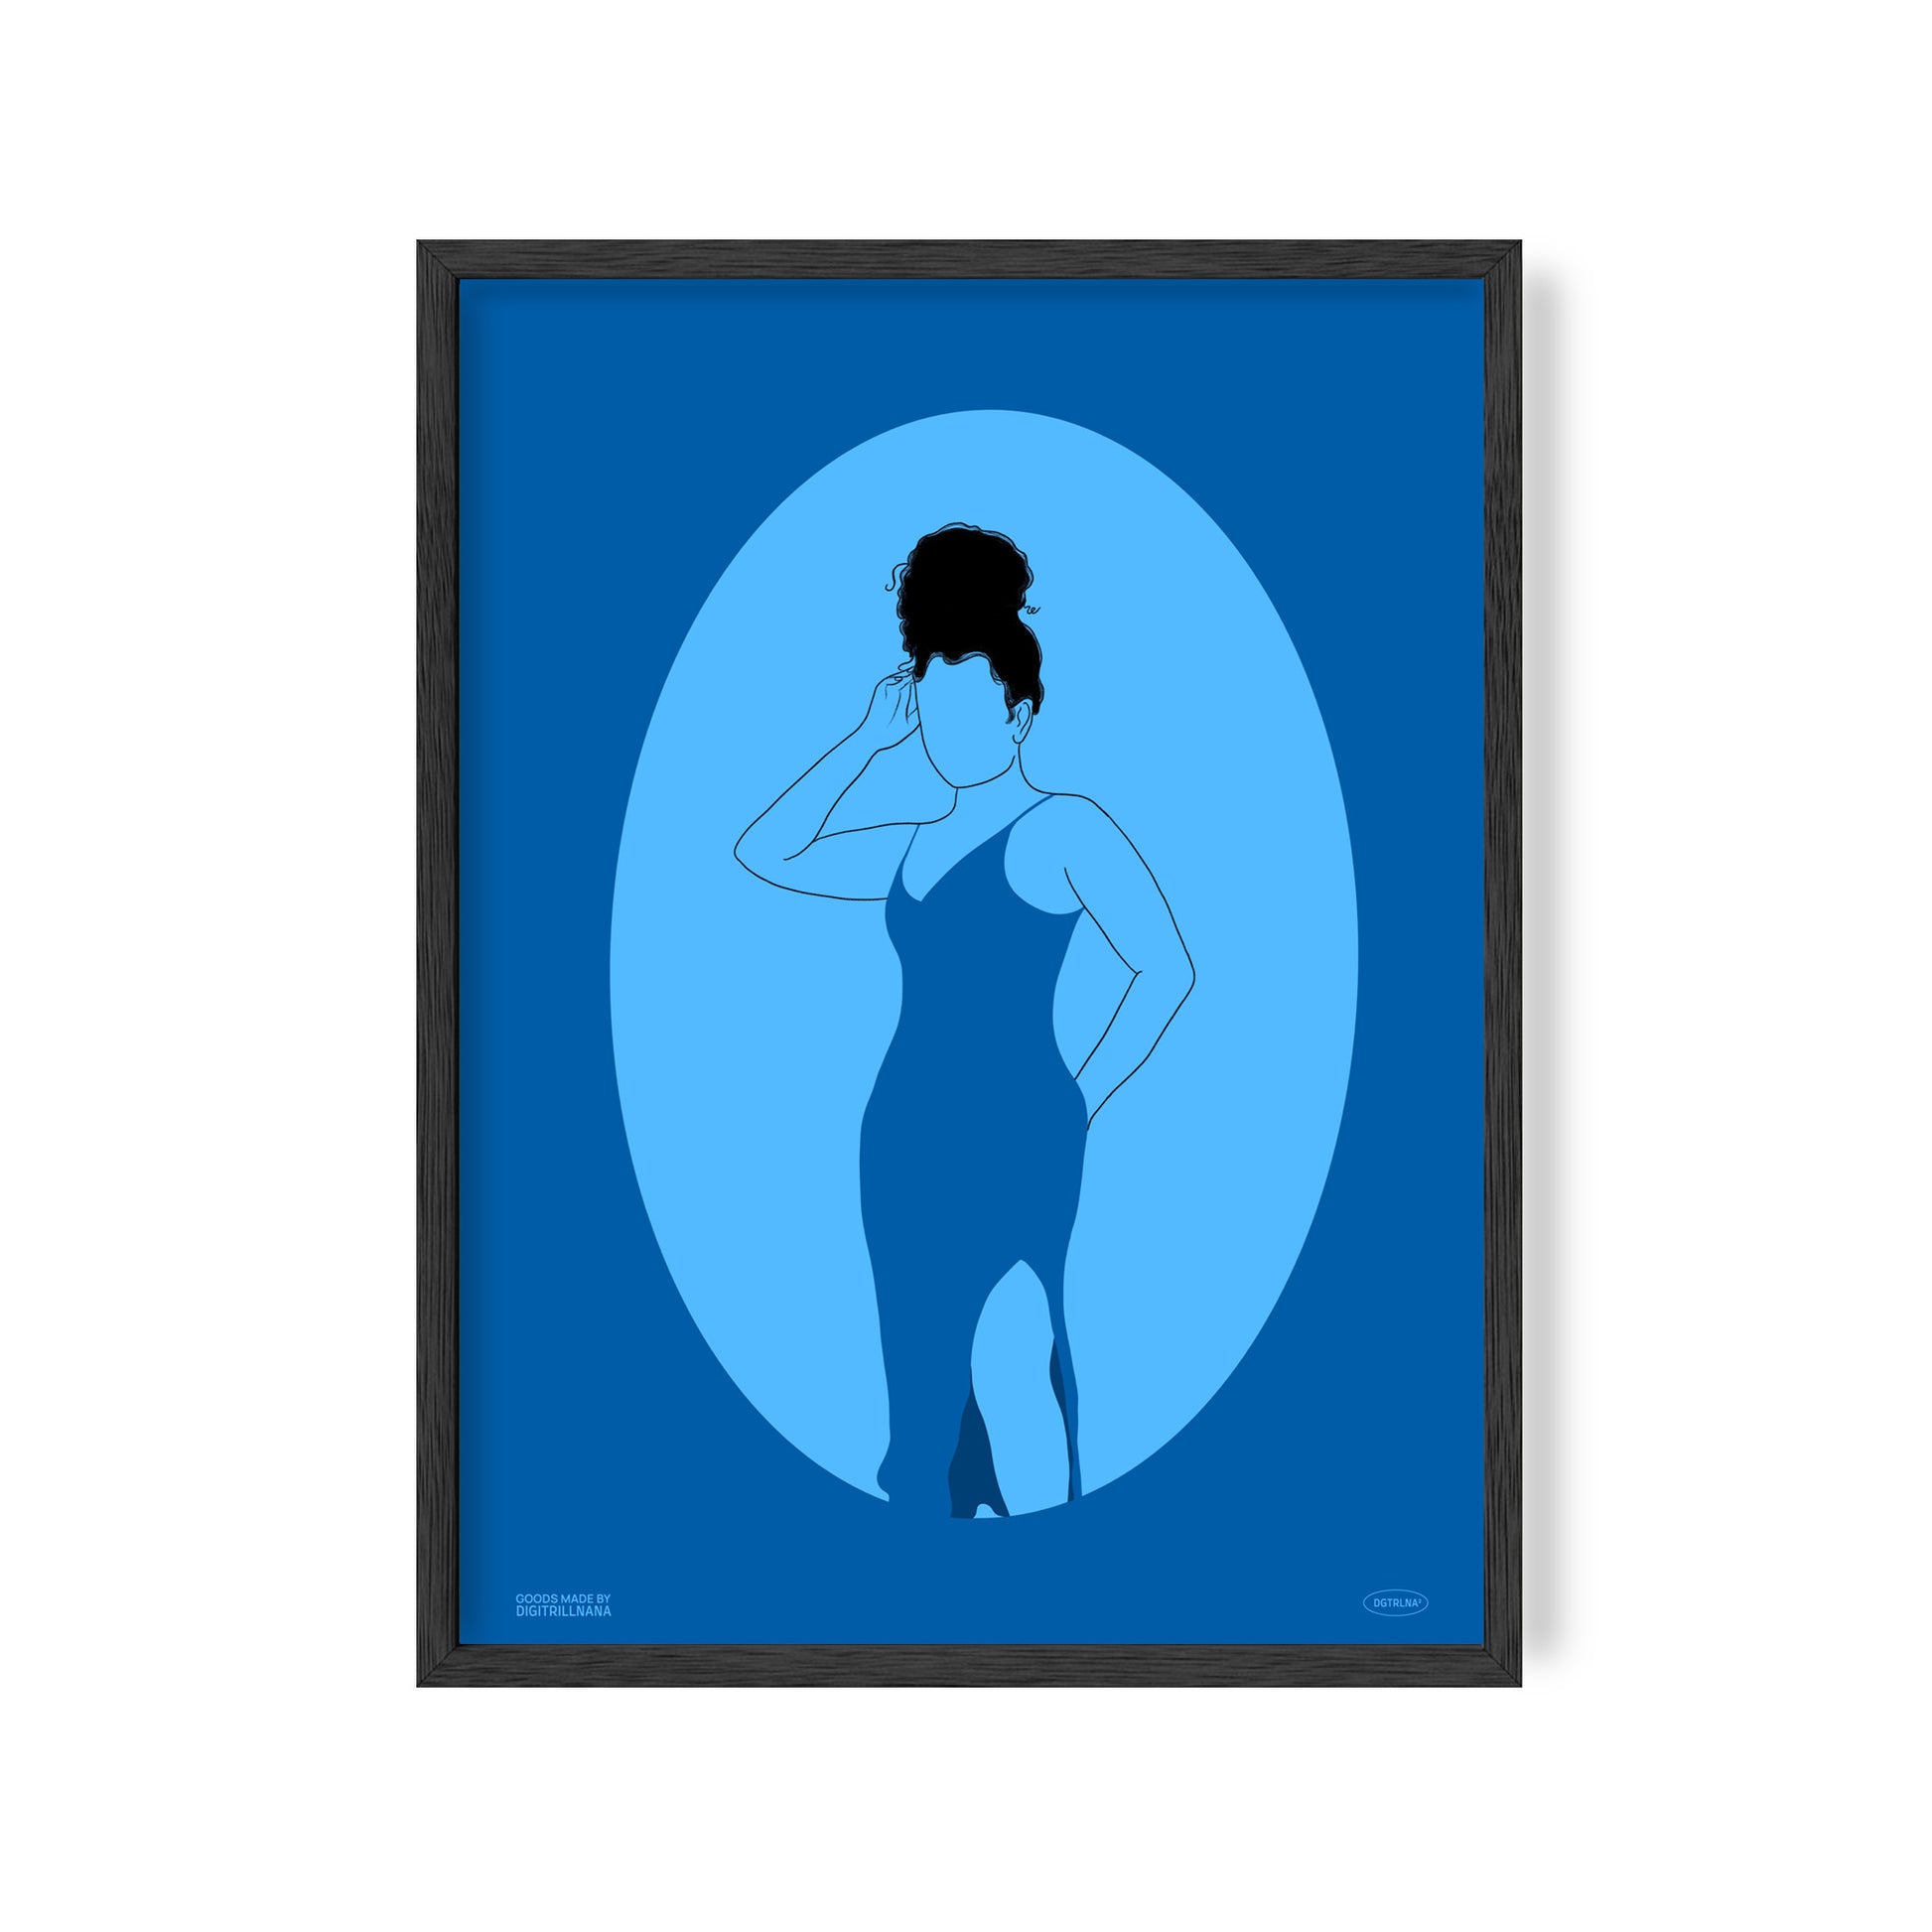 A series of four vibrant monochromatic illustrations of black women figures in the hues orange, blue, and teal. The illustration features a silhouette oval with a women’s figure inside. Light and dark colors create an optical illusion with positive and negative space.  Silhouette 3: Illustration of a blue monochrome silhouette front view of a figure posing in a dress with one hand by her head and the other behind her with her hair in a curly bun. 